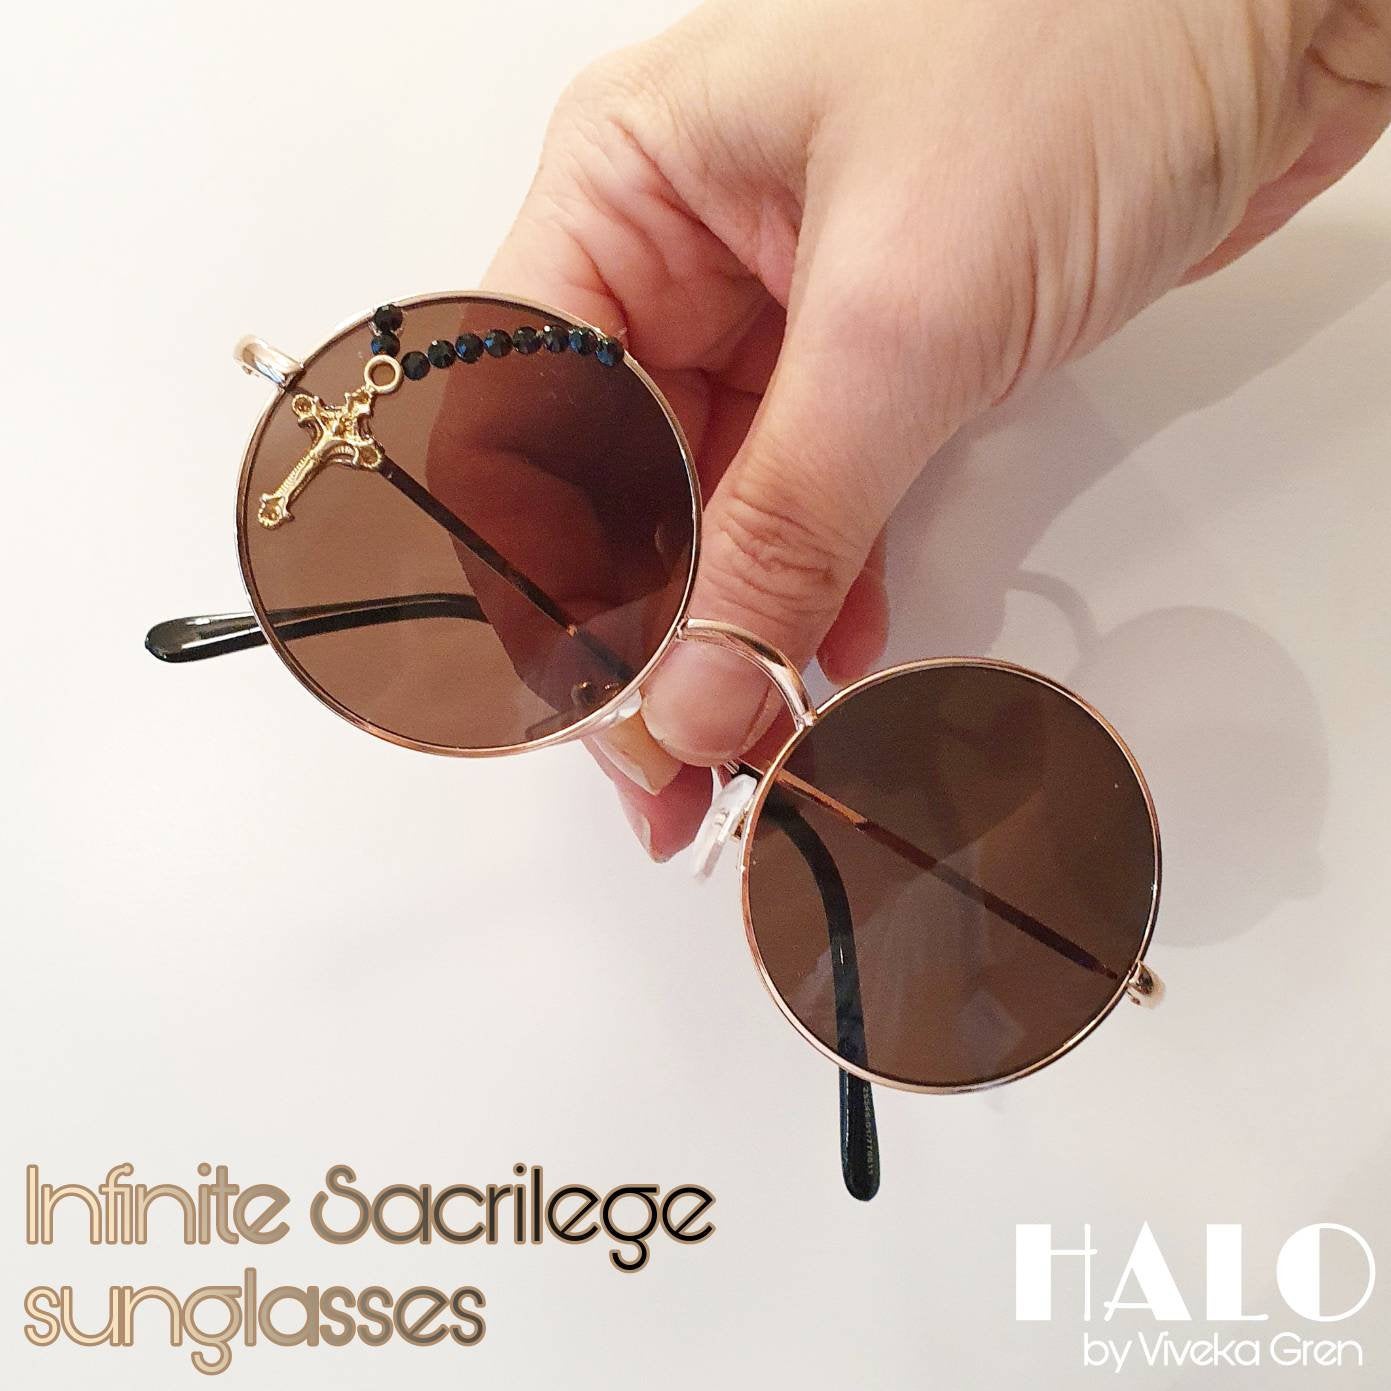 Sacrilegious Collection: The Infinite Sacrilege sunglasses, limited edition round unisex model